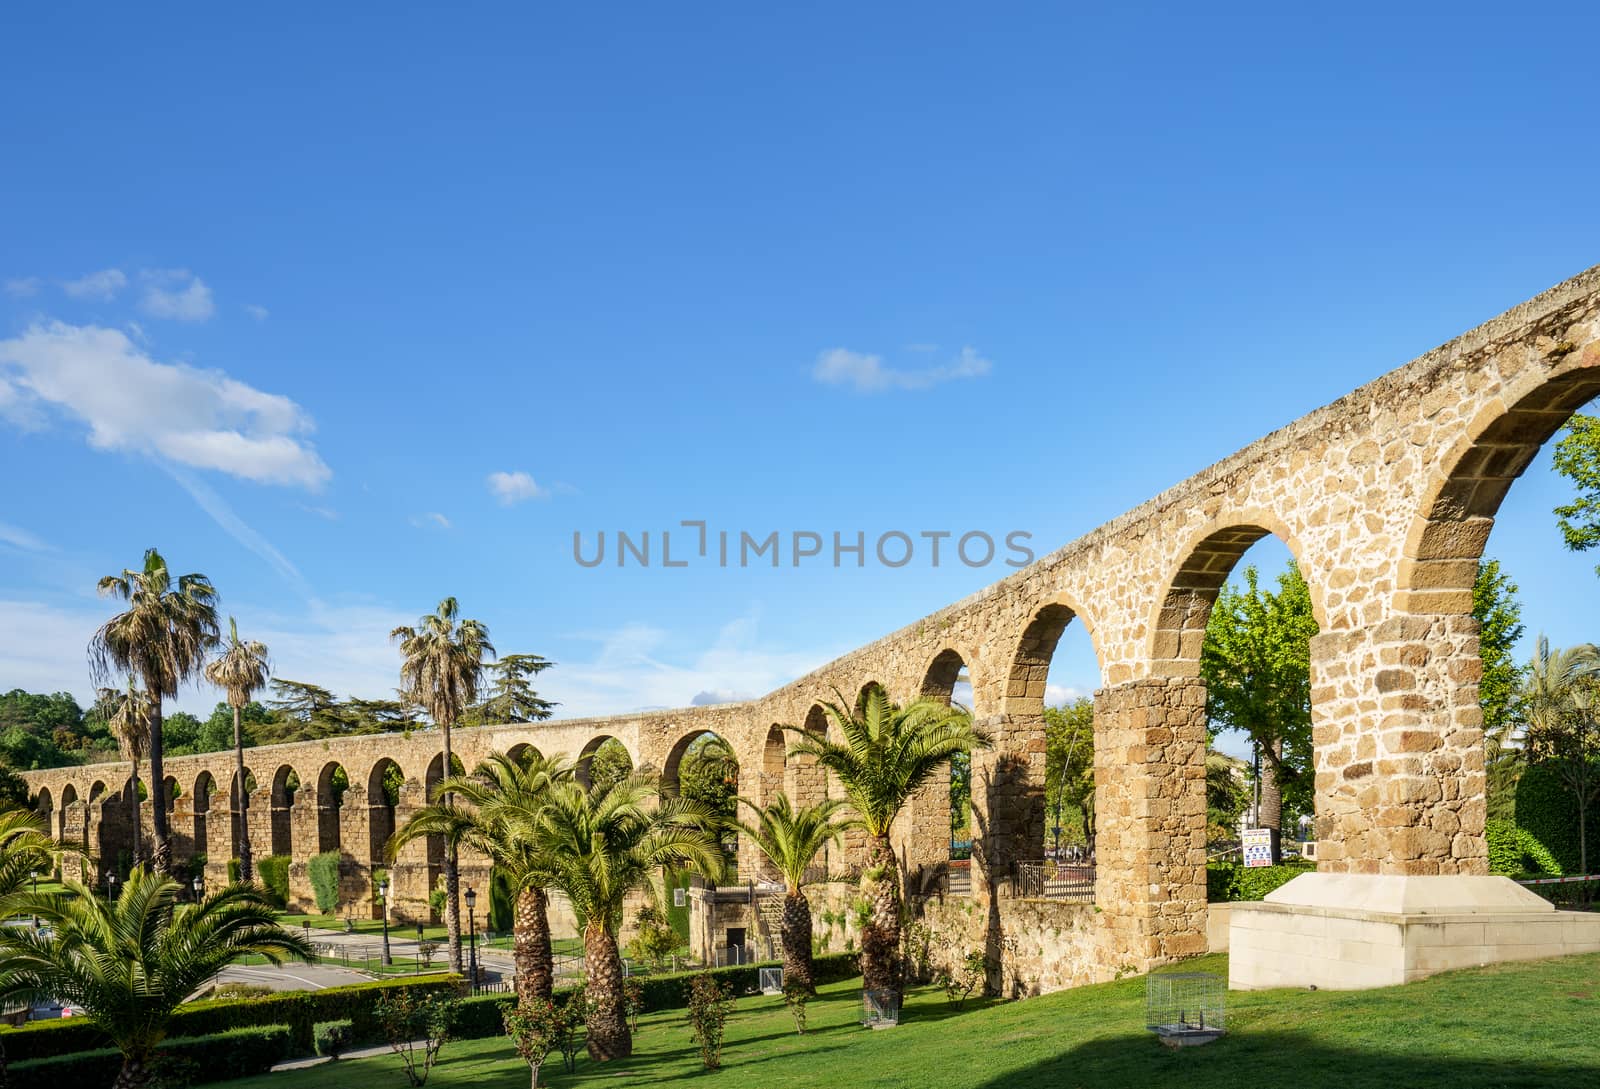 Aqueduct of San Anton in Plasencia, province of Caceres, Spain by tanaonte